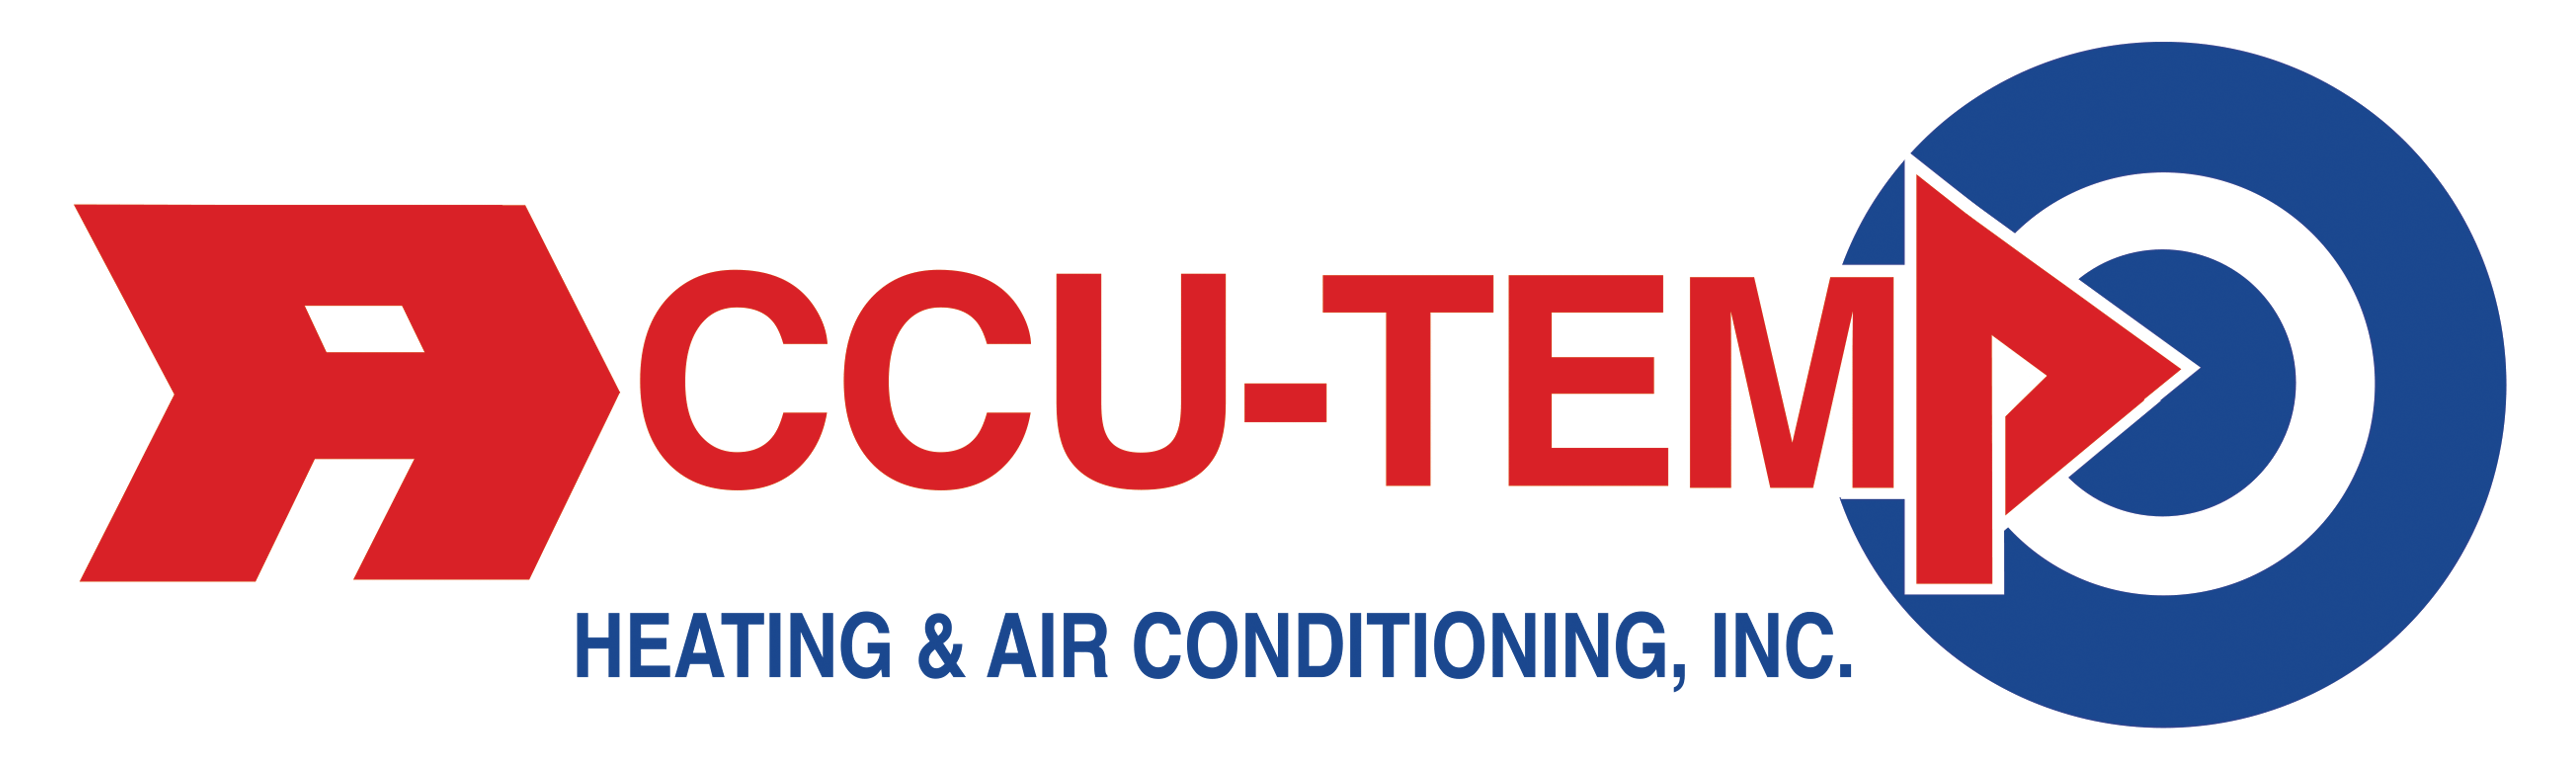 Call Accu-Temp Heating & Air Conditioning for great Furnace repair service in Howell MI.